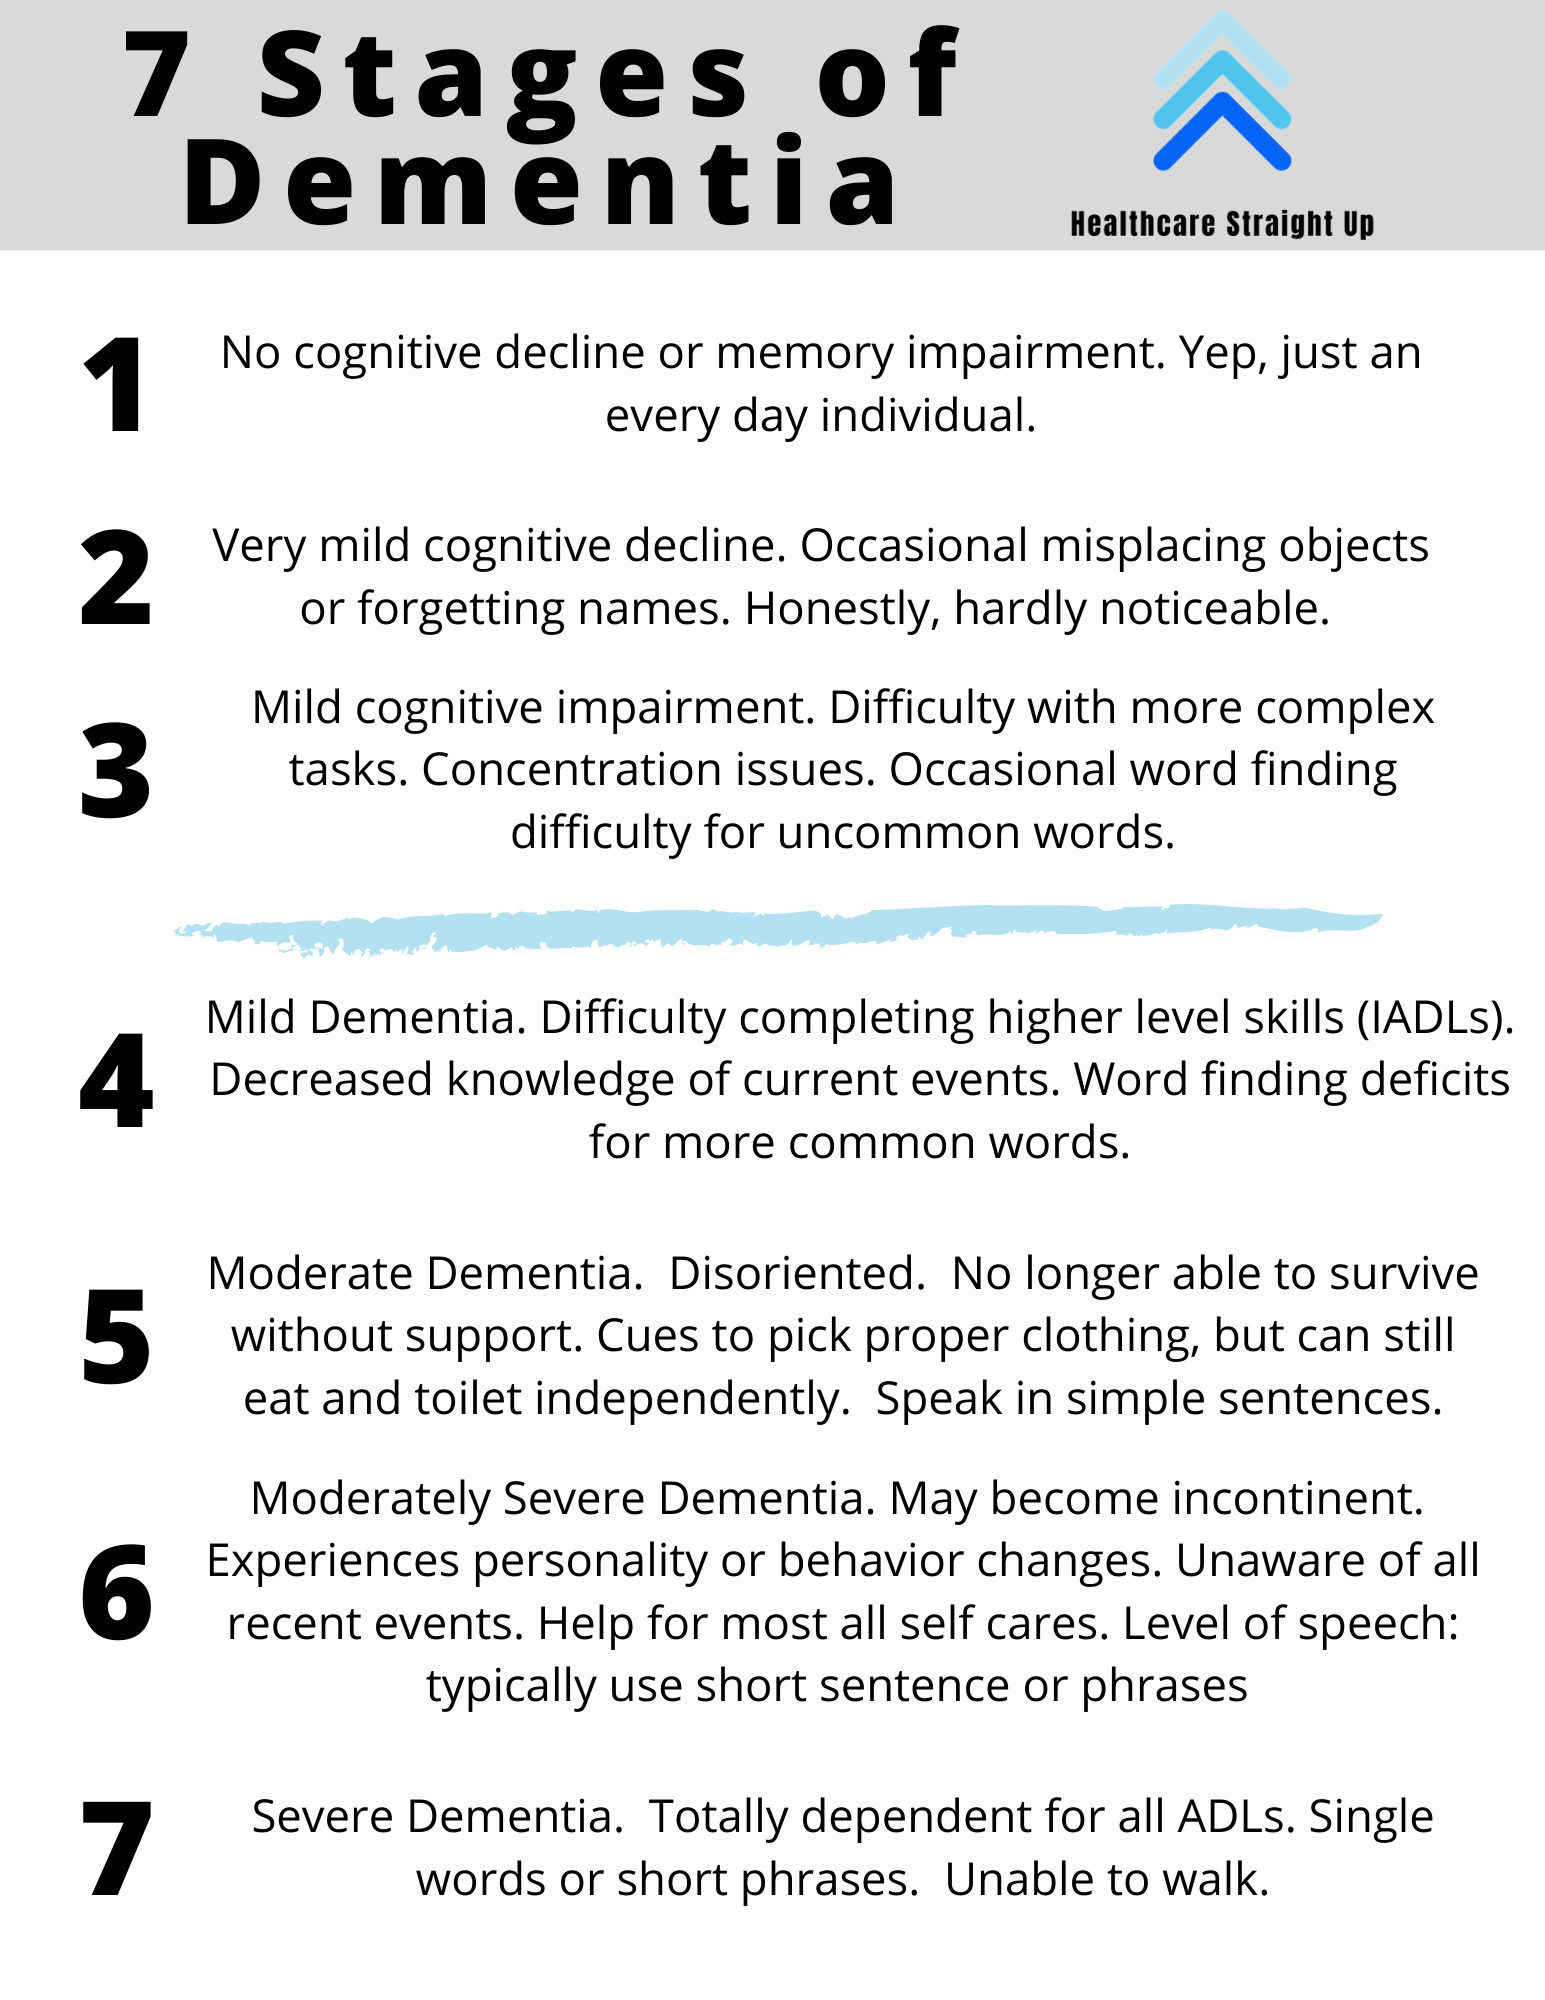 7 stages of Dementia in 2020